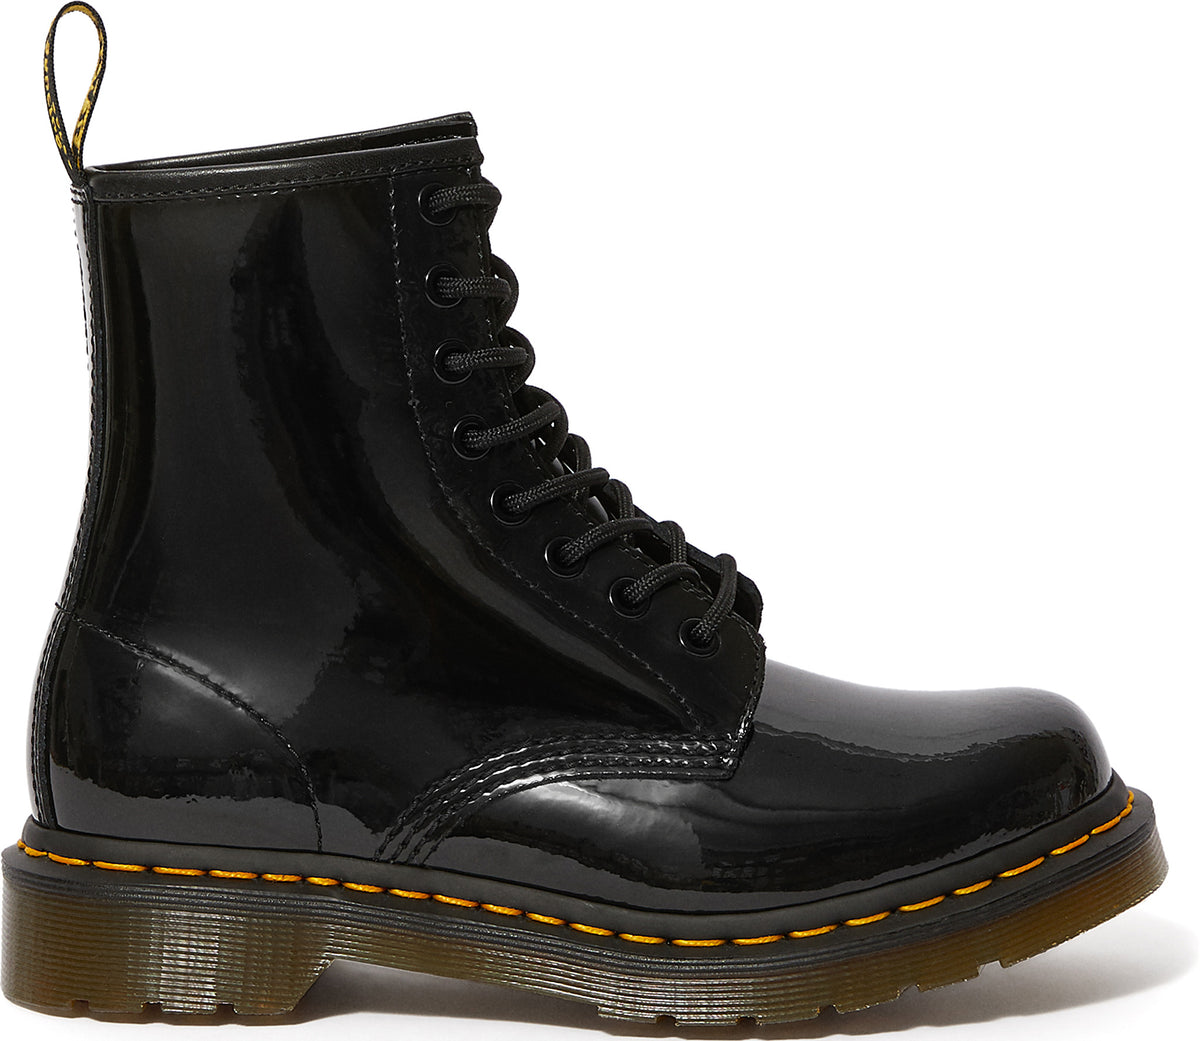 Dr. Martens 1460 Patent Leather Lace Up Boots - Women's | Altitude Sports